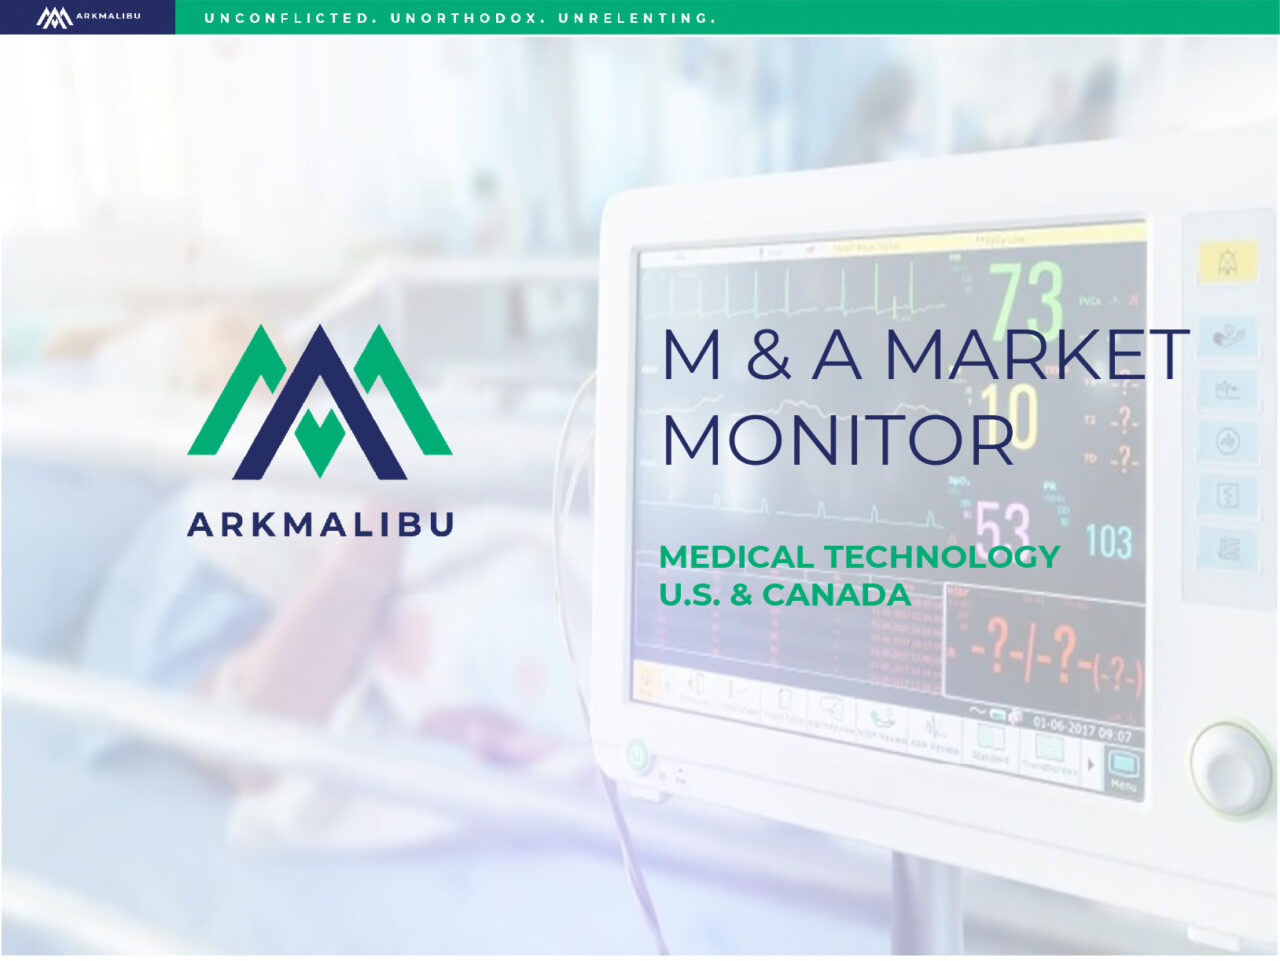 Market Monitor Cover for Medical Technology. Faded Image of a vitals monitor in the background